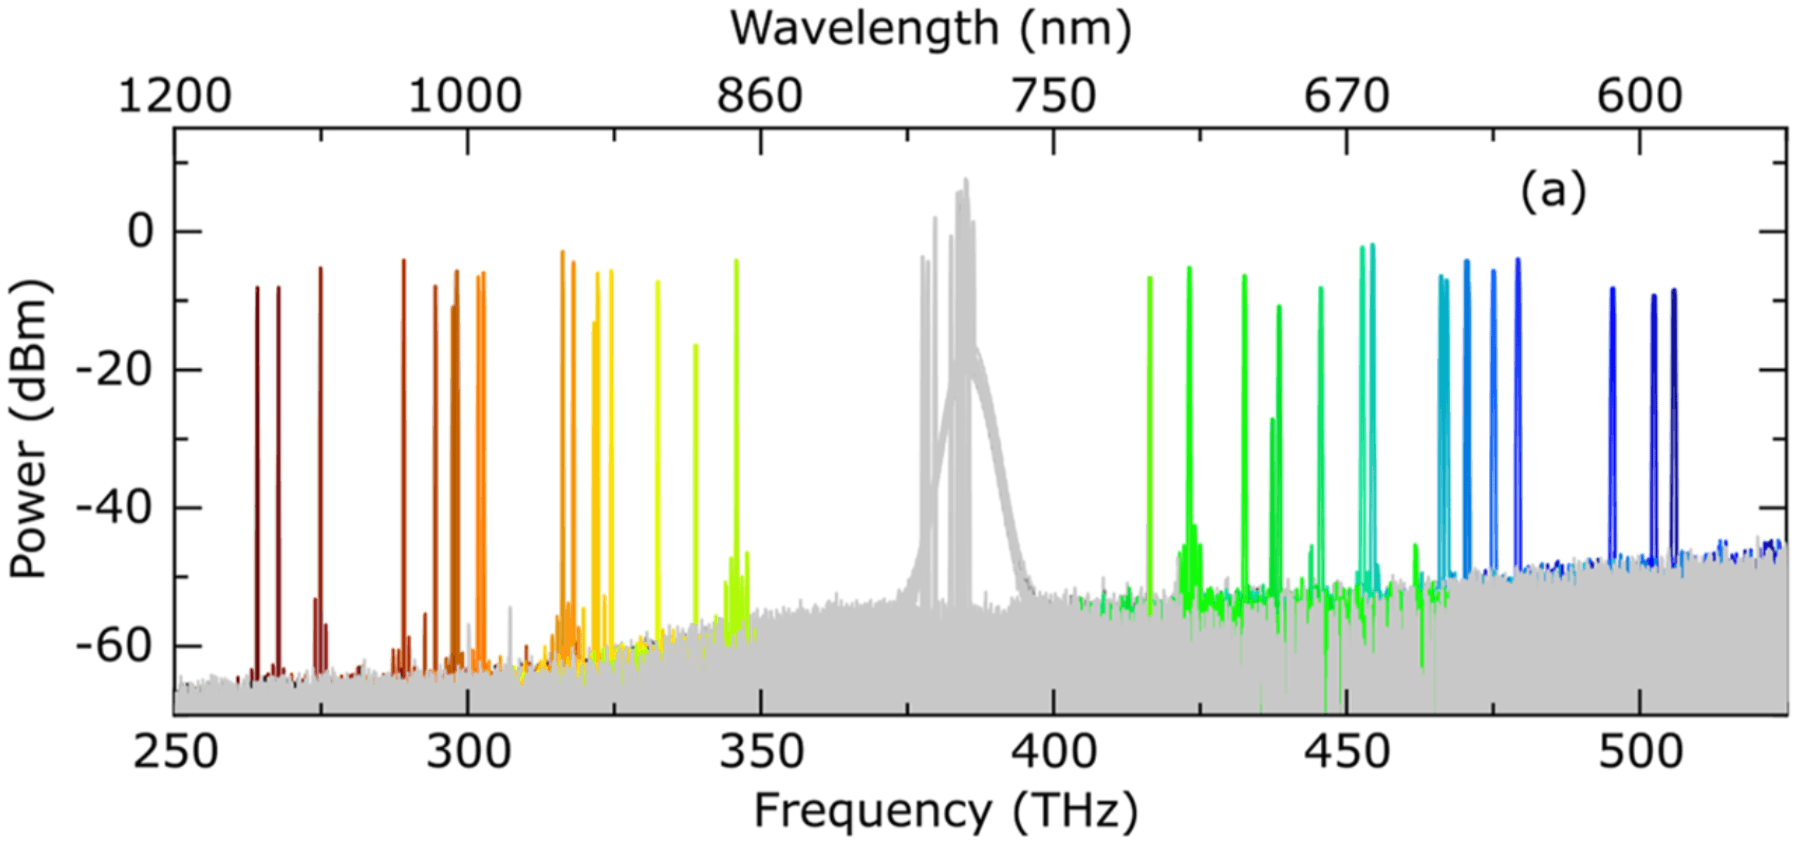 Optical spectra of several optical parametric oscillator devices, showing output light between 590 nm and 1150 nm